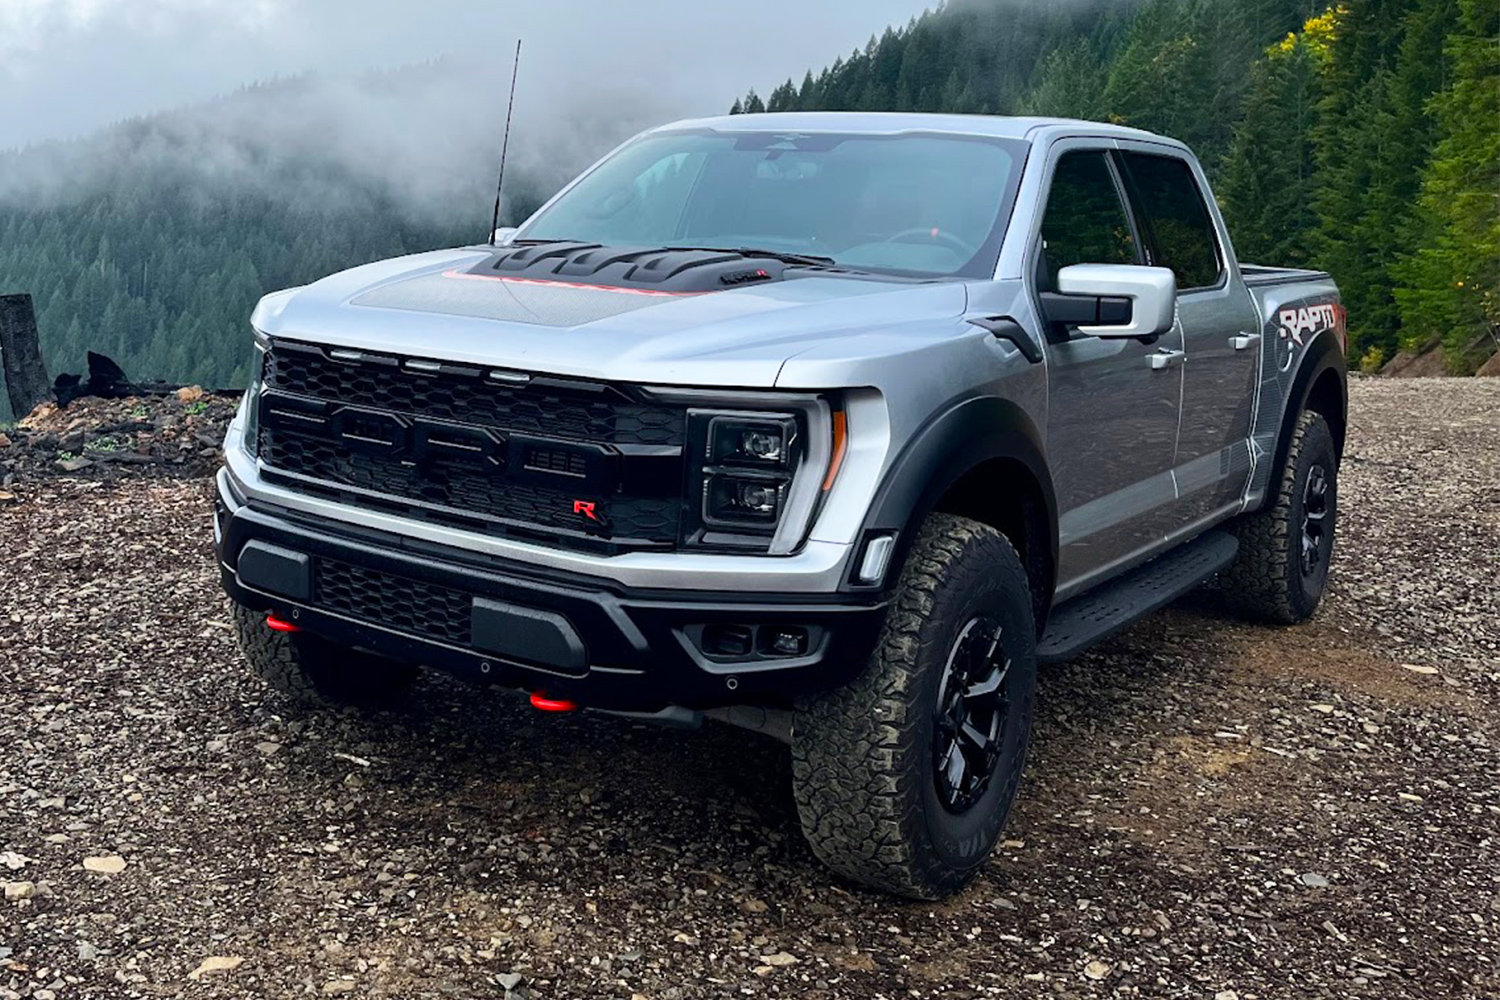 Review: Off-Road Test of Ford's 700-Horsepower F-150 Raptor R